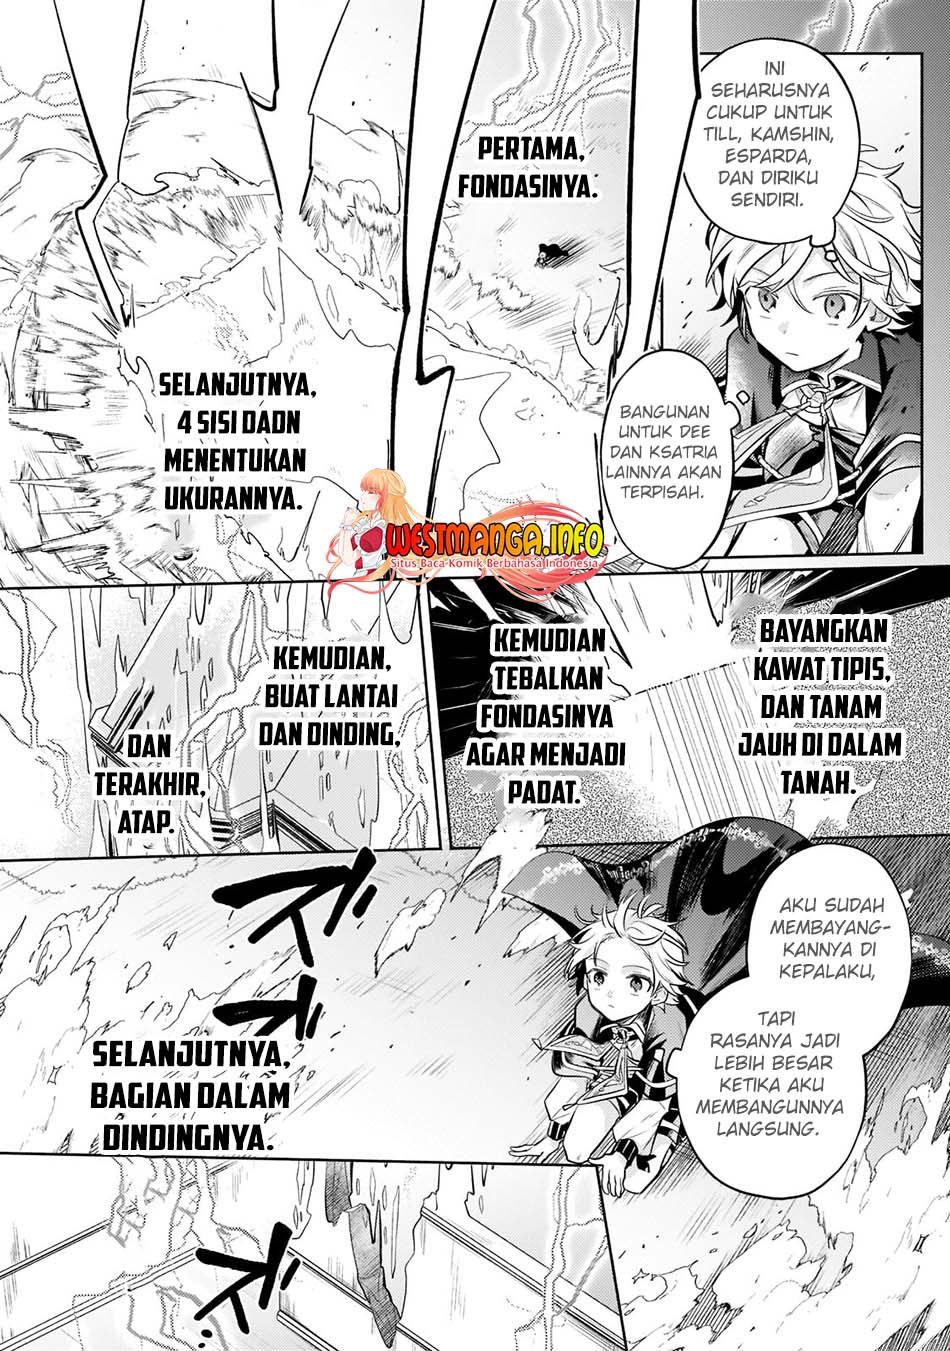 Fun Territory Defense Of The Easy-Going Lord ~The Nameless Village Is Made Into The Strongest Fortified City By Production Magic~ Chapter 09 - 209